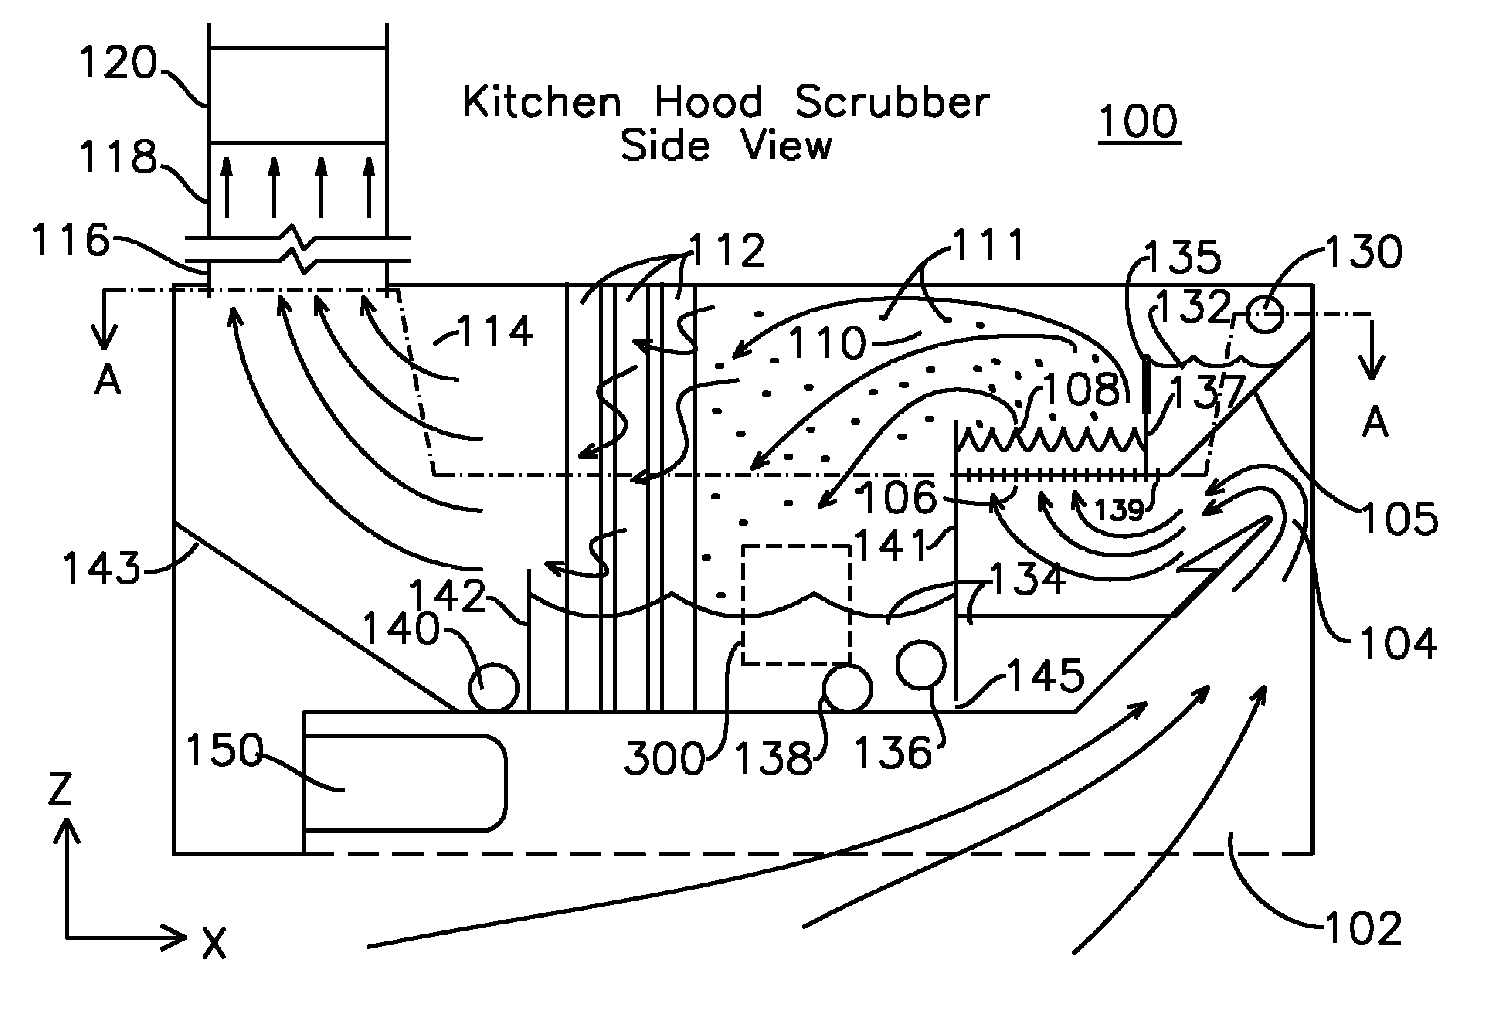 Kitchen hood vent and scrubber